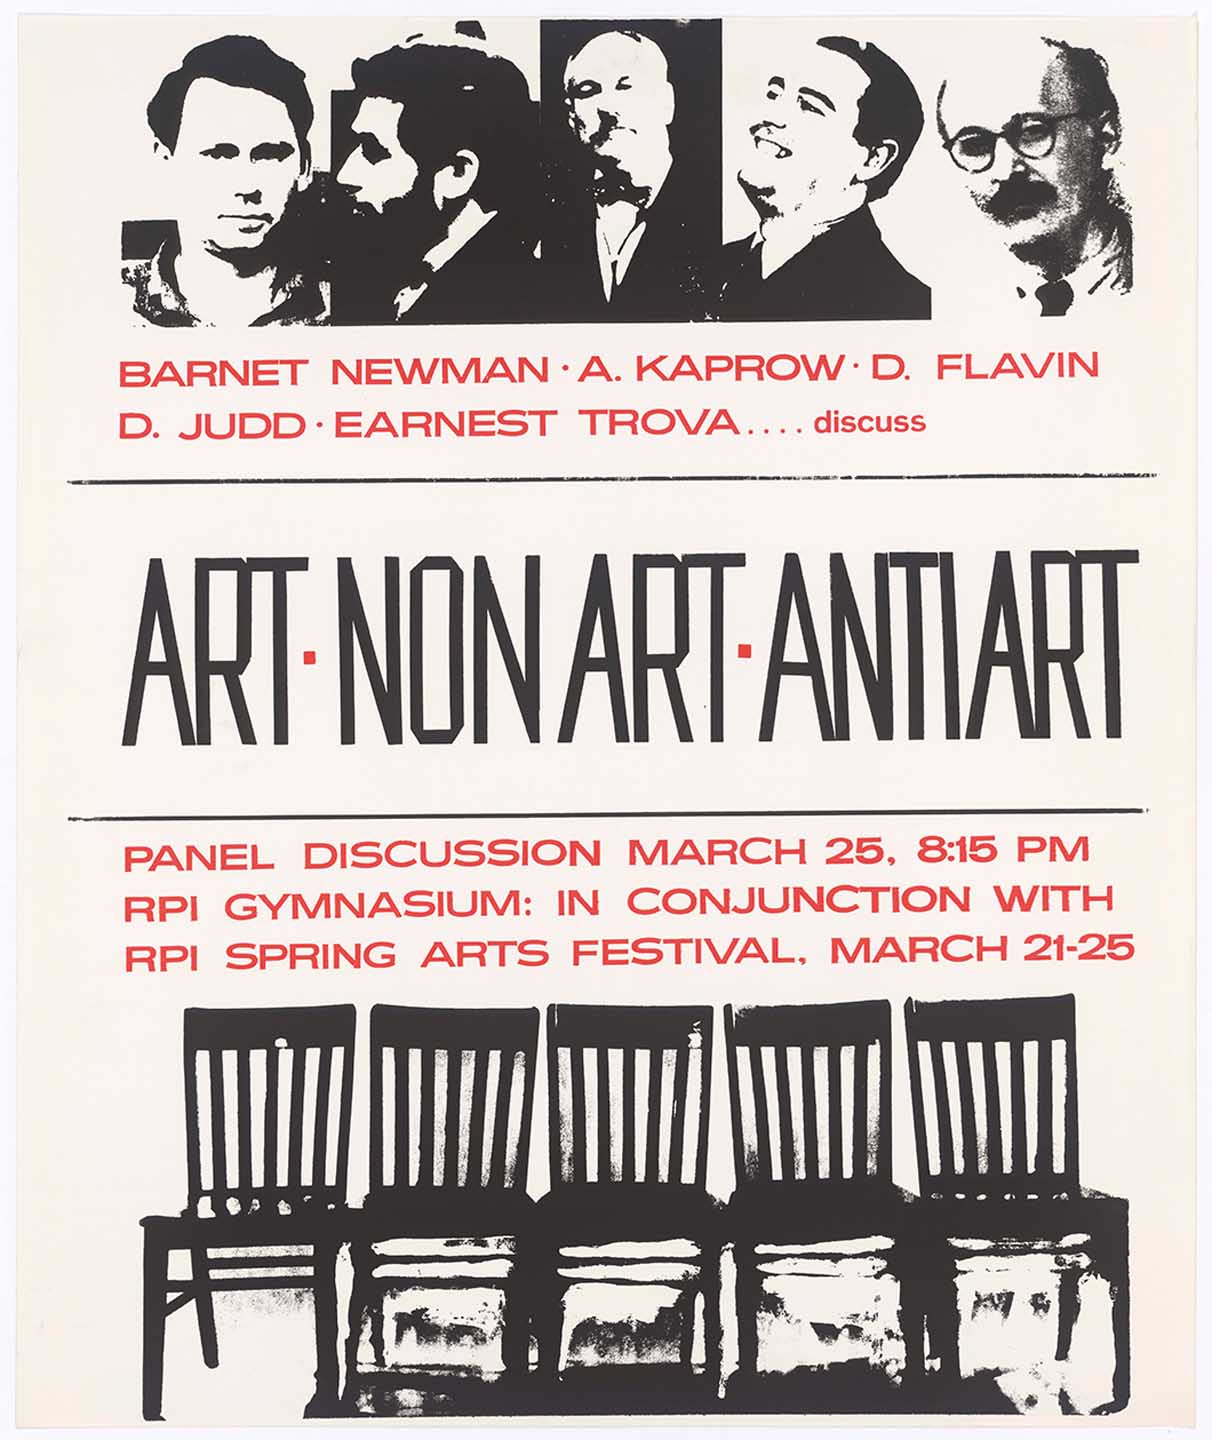 A poster promoting the Bang Arts festival at Richmond Professional Institute in the 1960s.